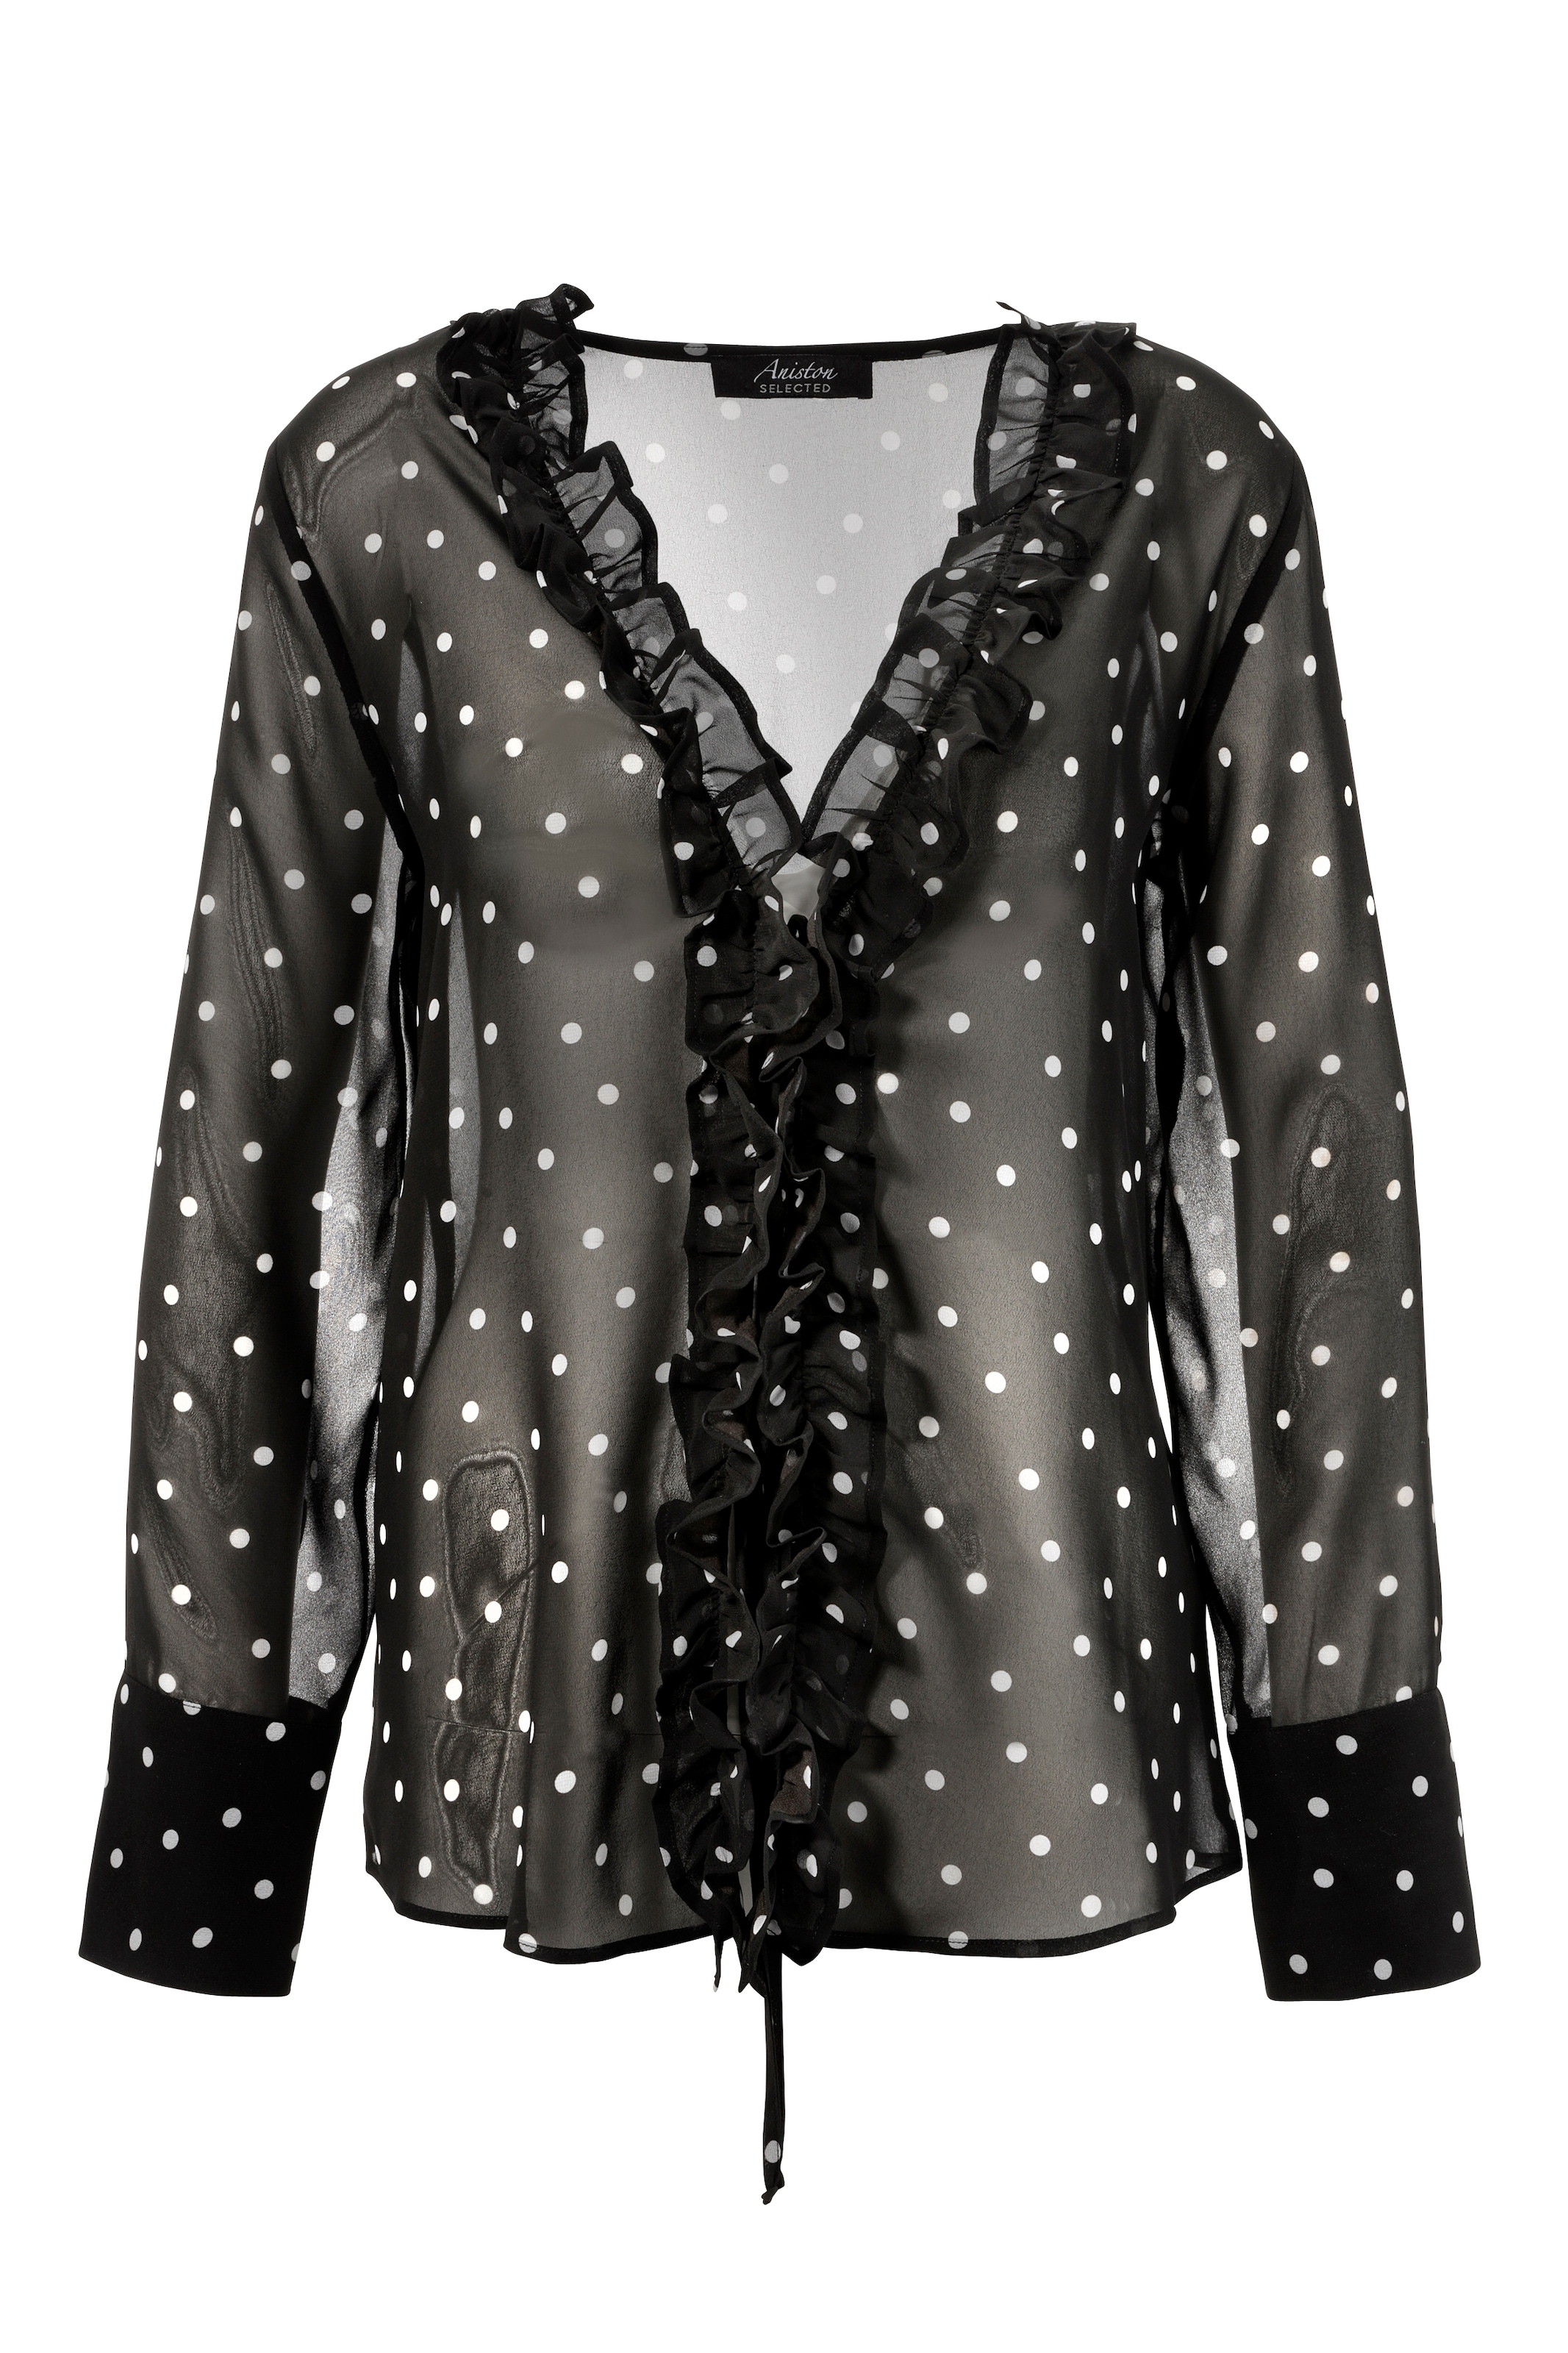 mit SELECTED ♕ bei Volants Aniston Chiffonbluse,